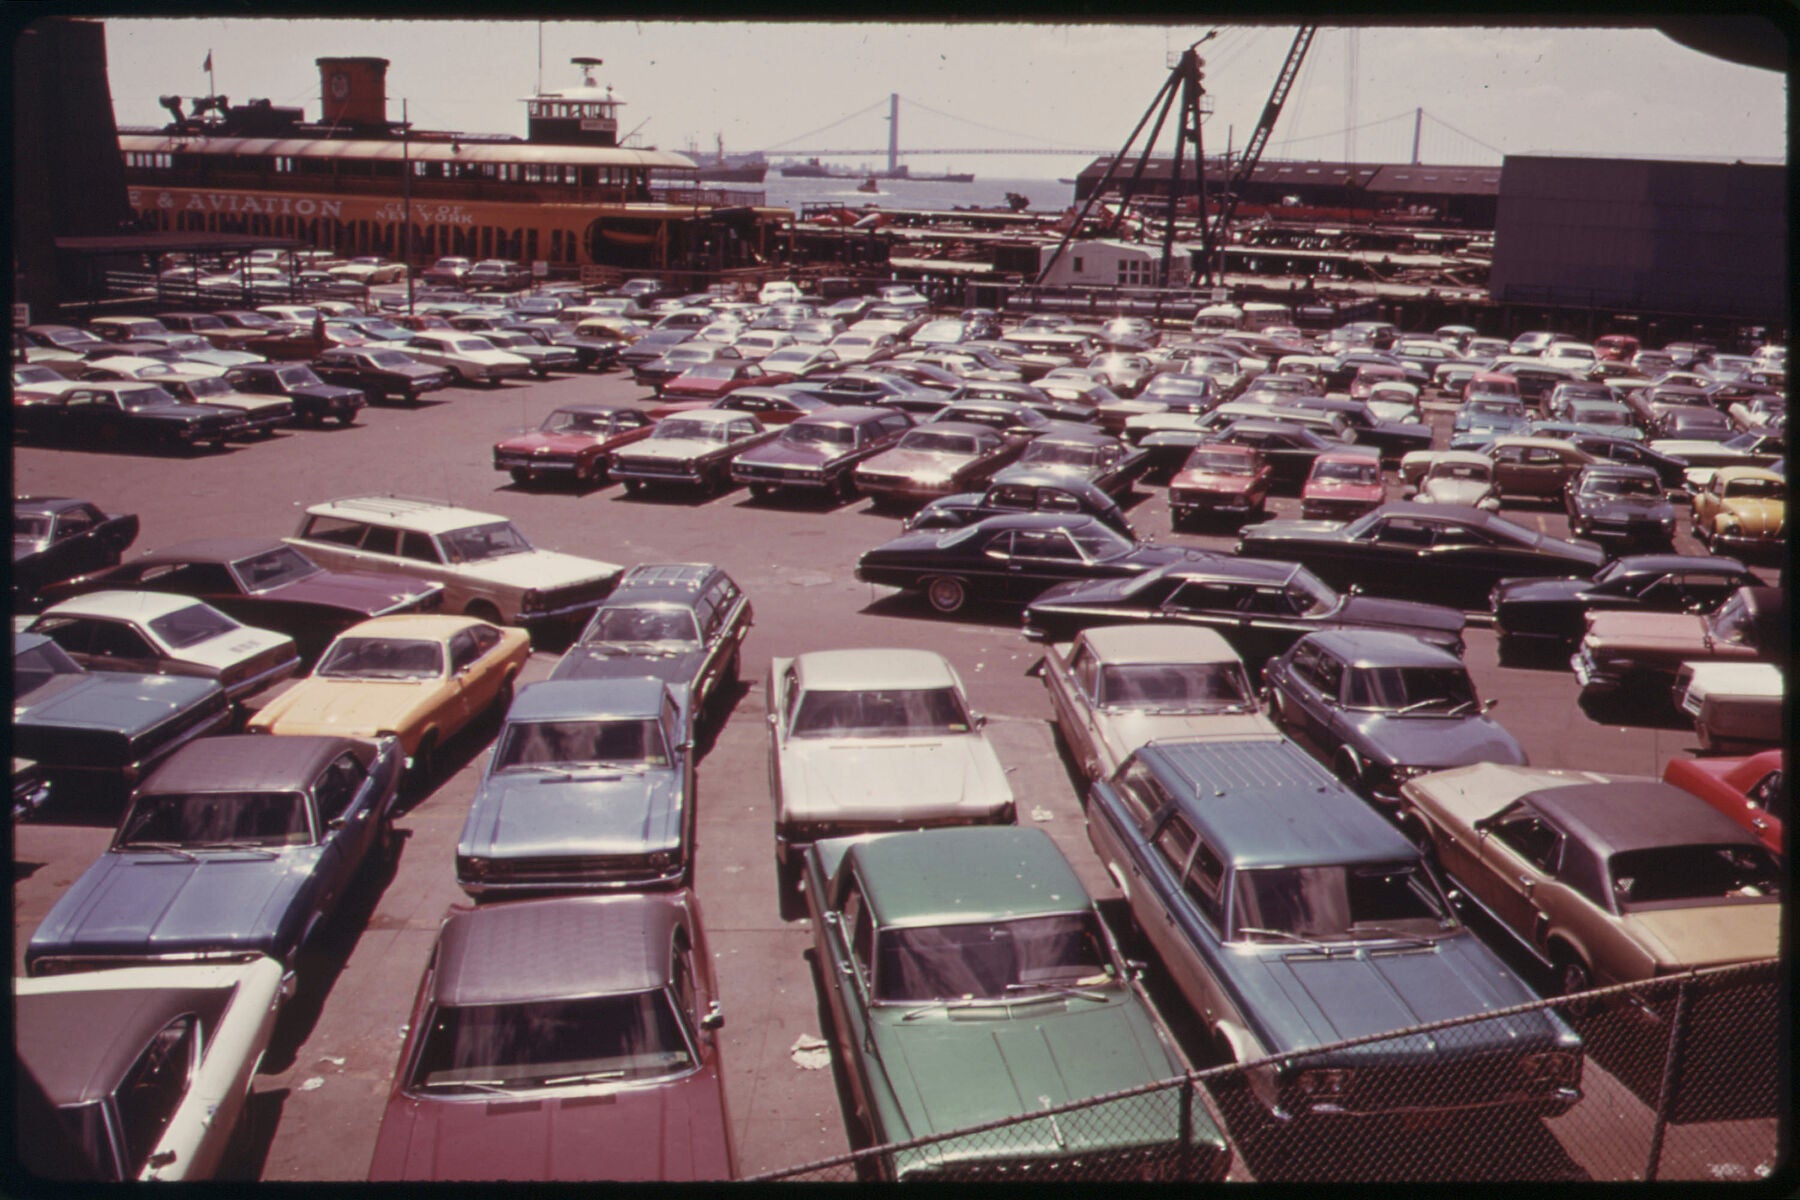 Parking Lot at Ferry Dock on Staten Island by Arthur Tress - 1973